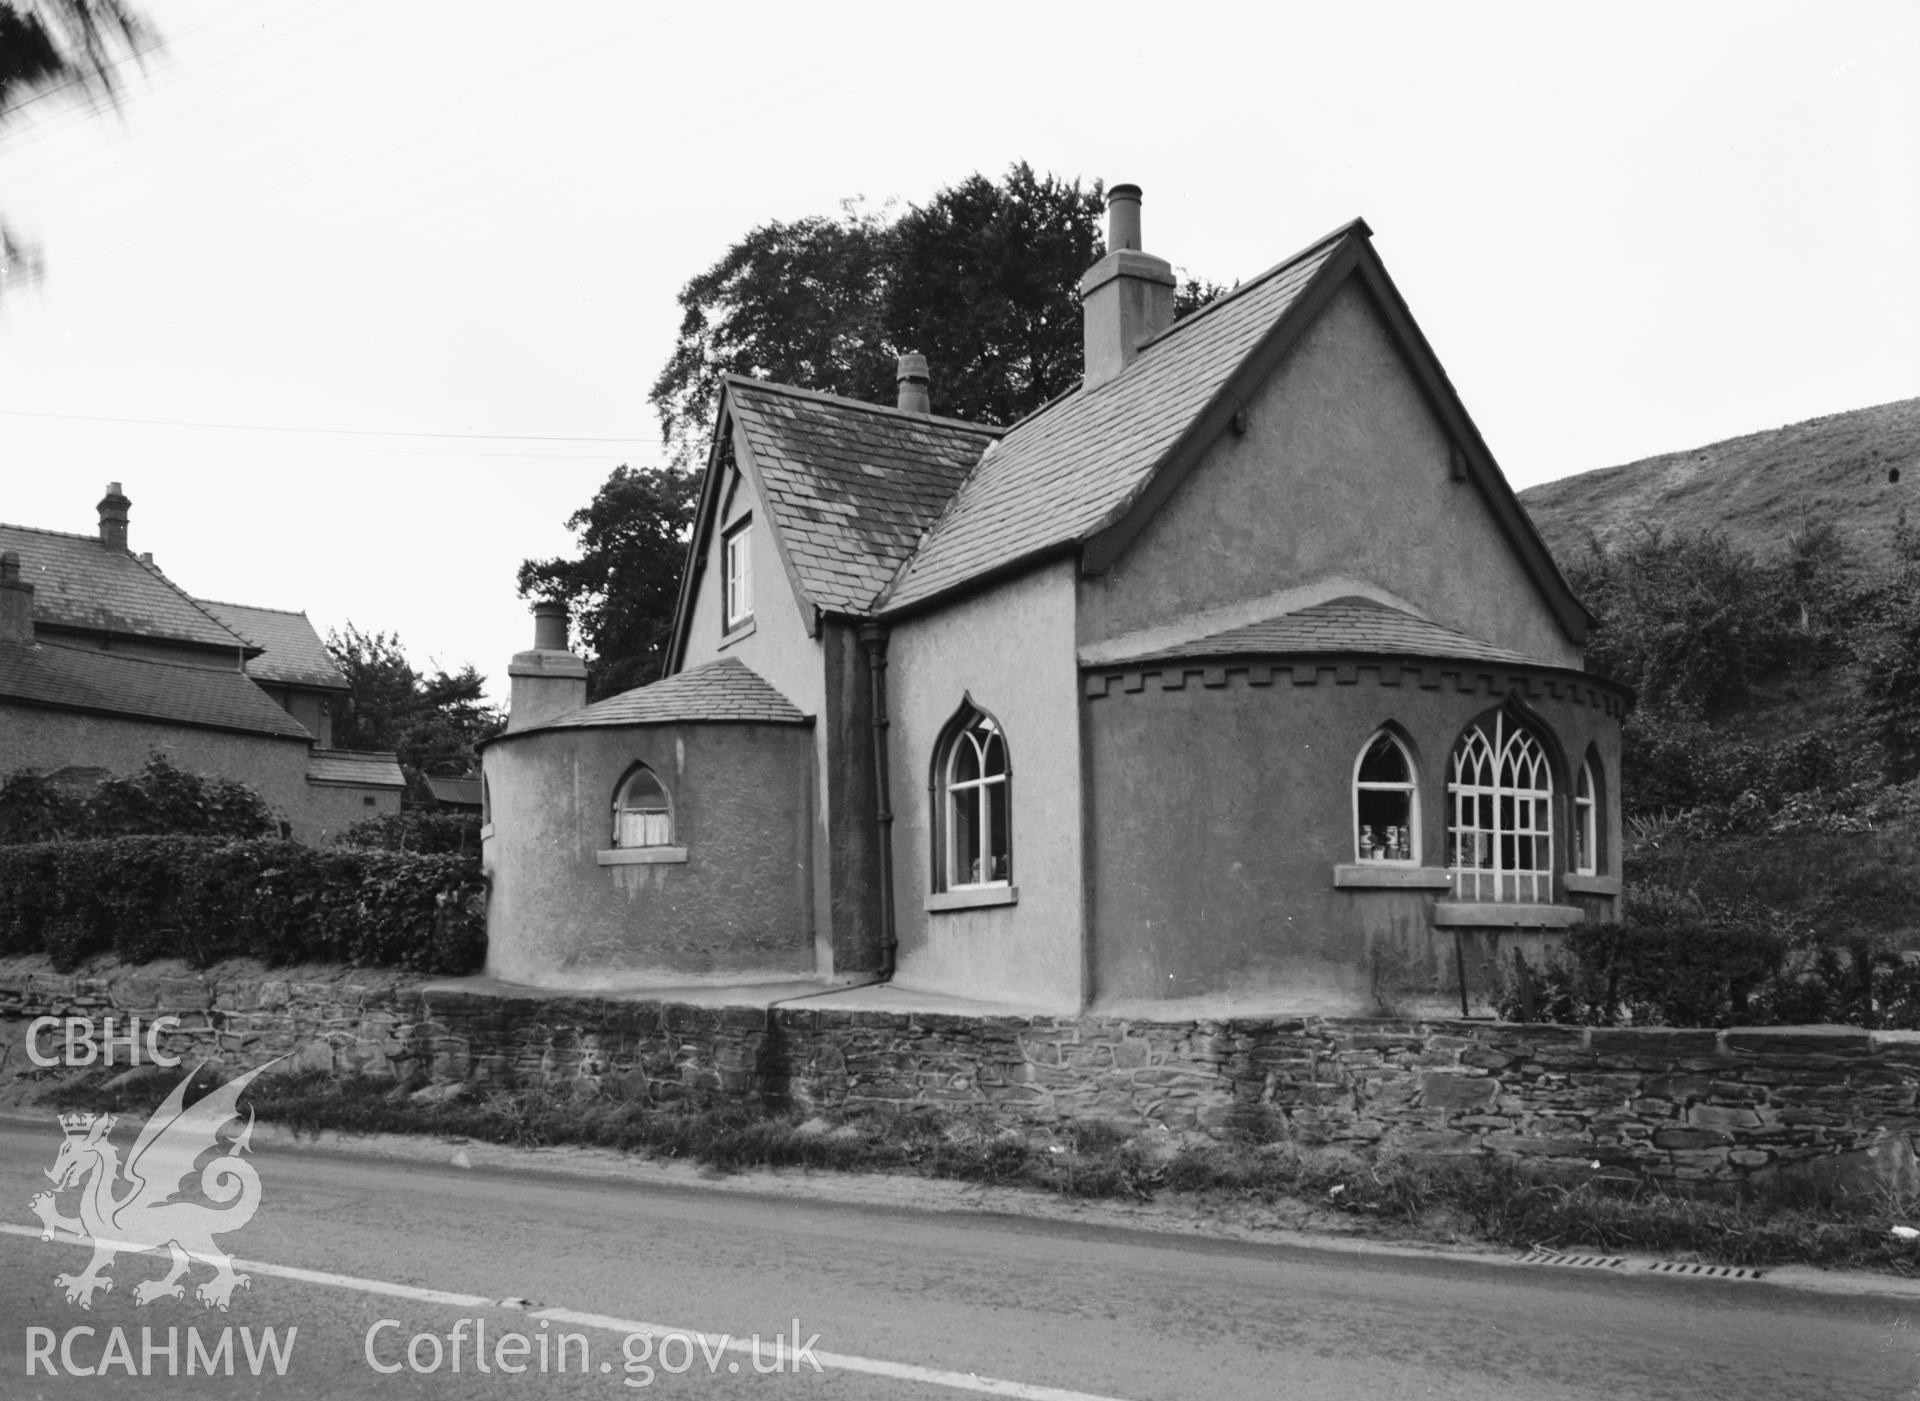 B&W photograph showing exterior view of Old Toll House, Marford, taken by G.B. Mason, 1952.